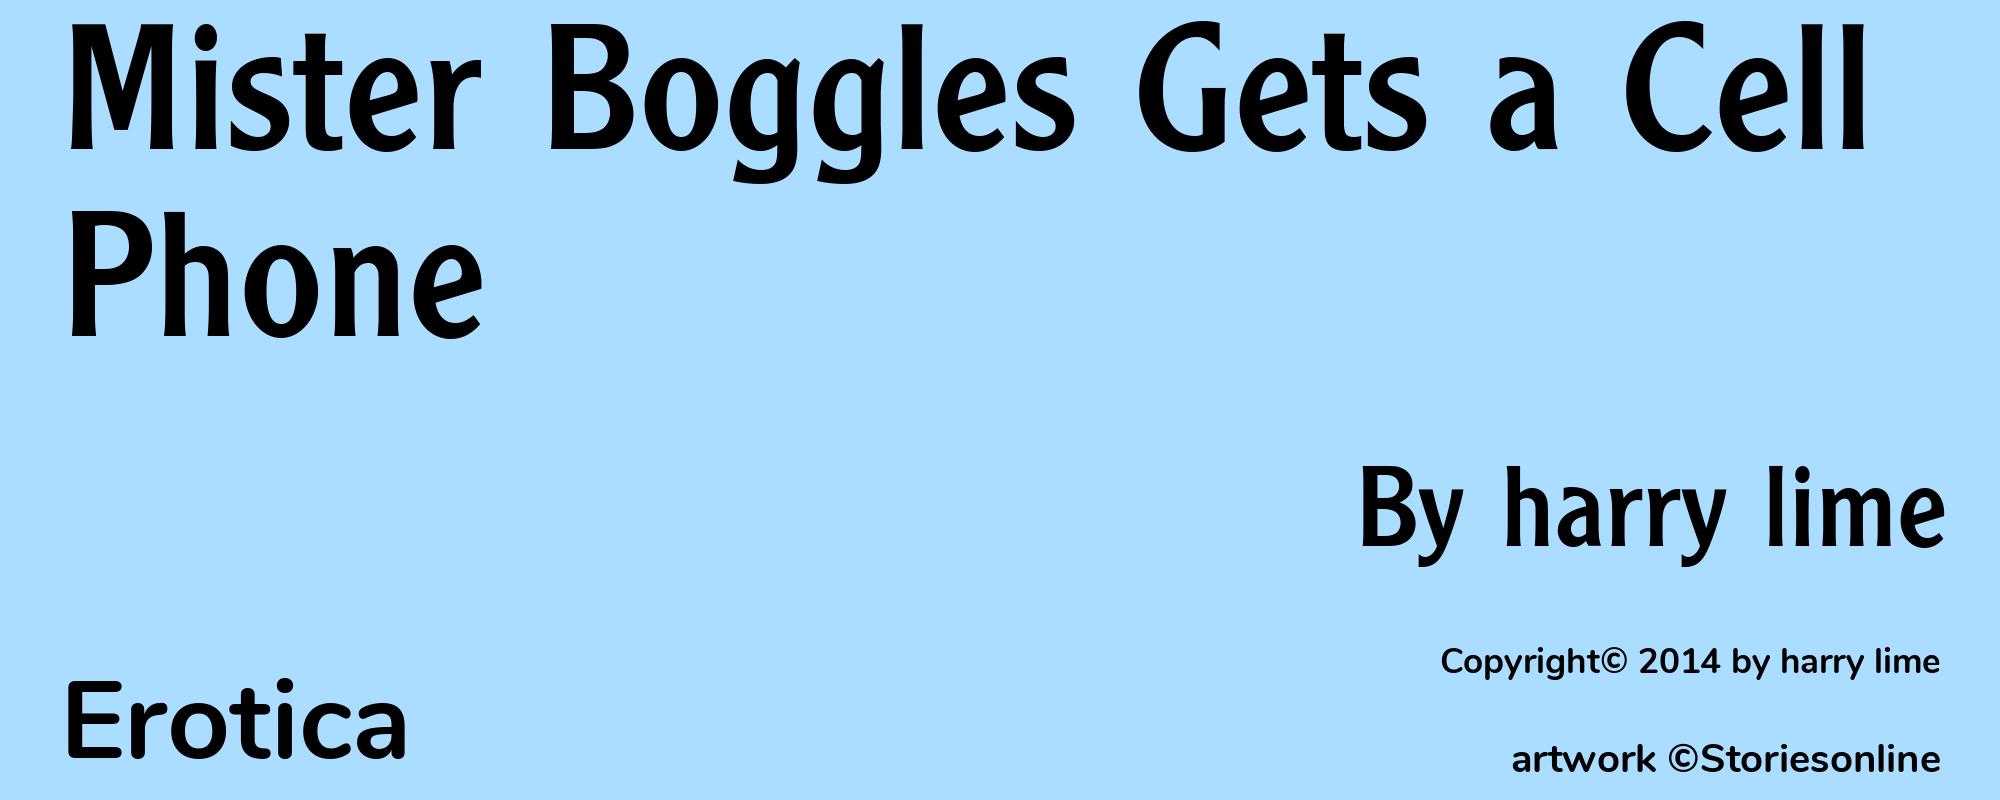 Mister Boggles Gets a Cell Phone - Cover